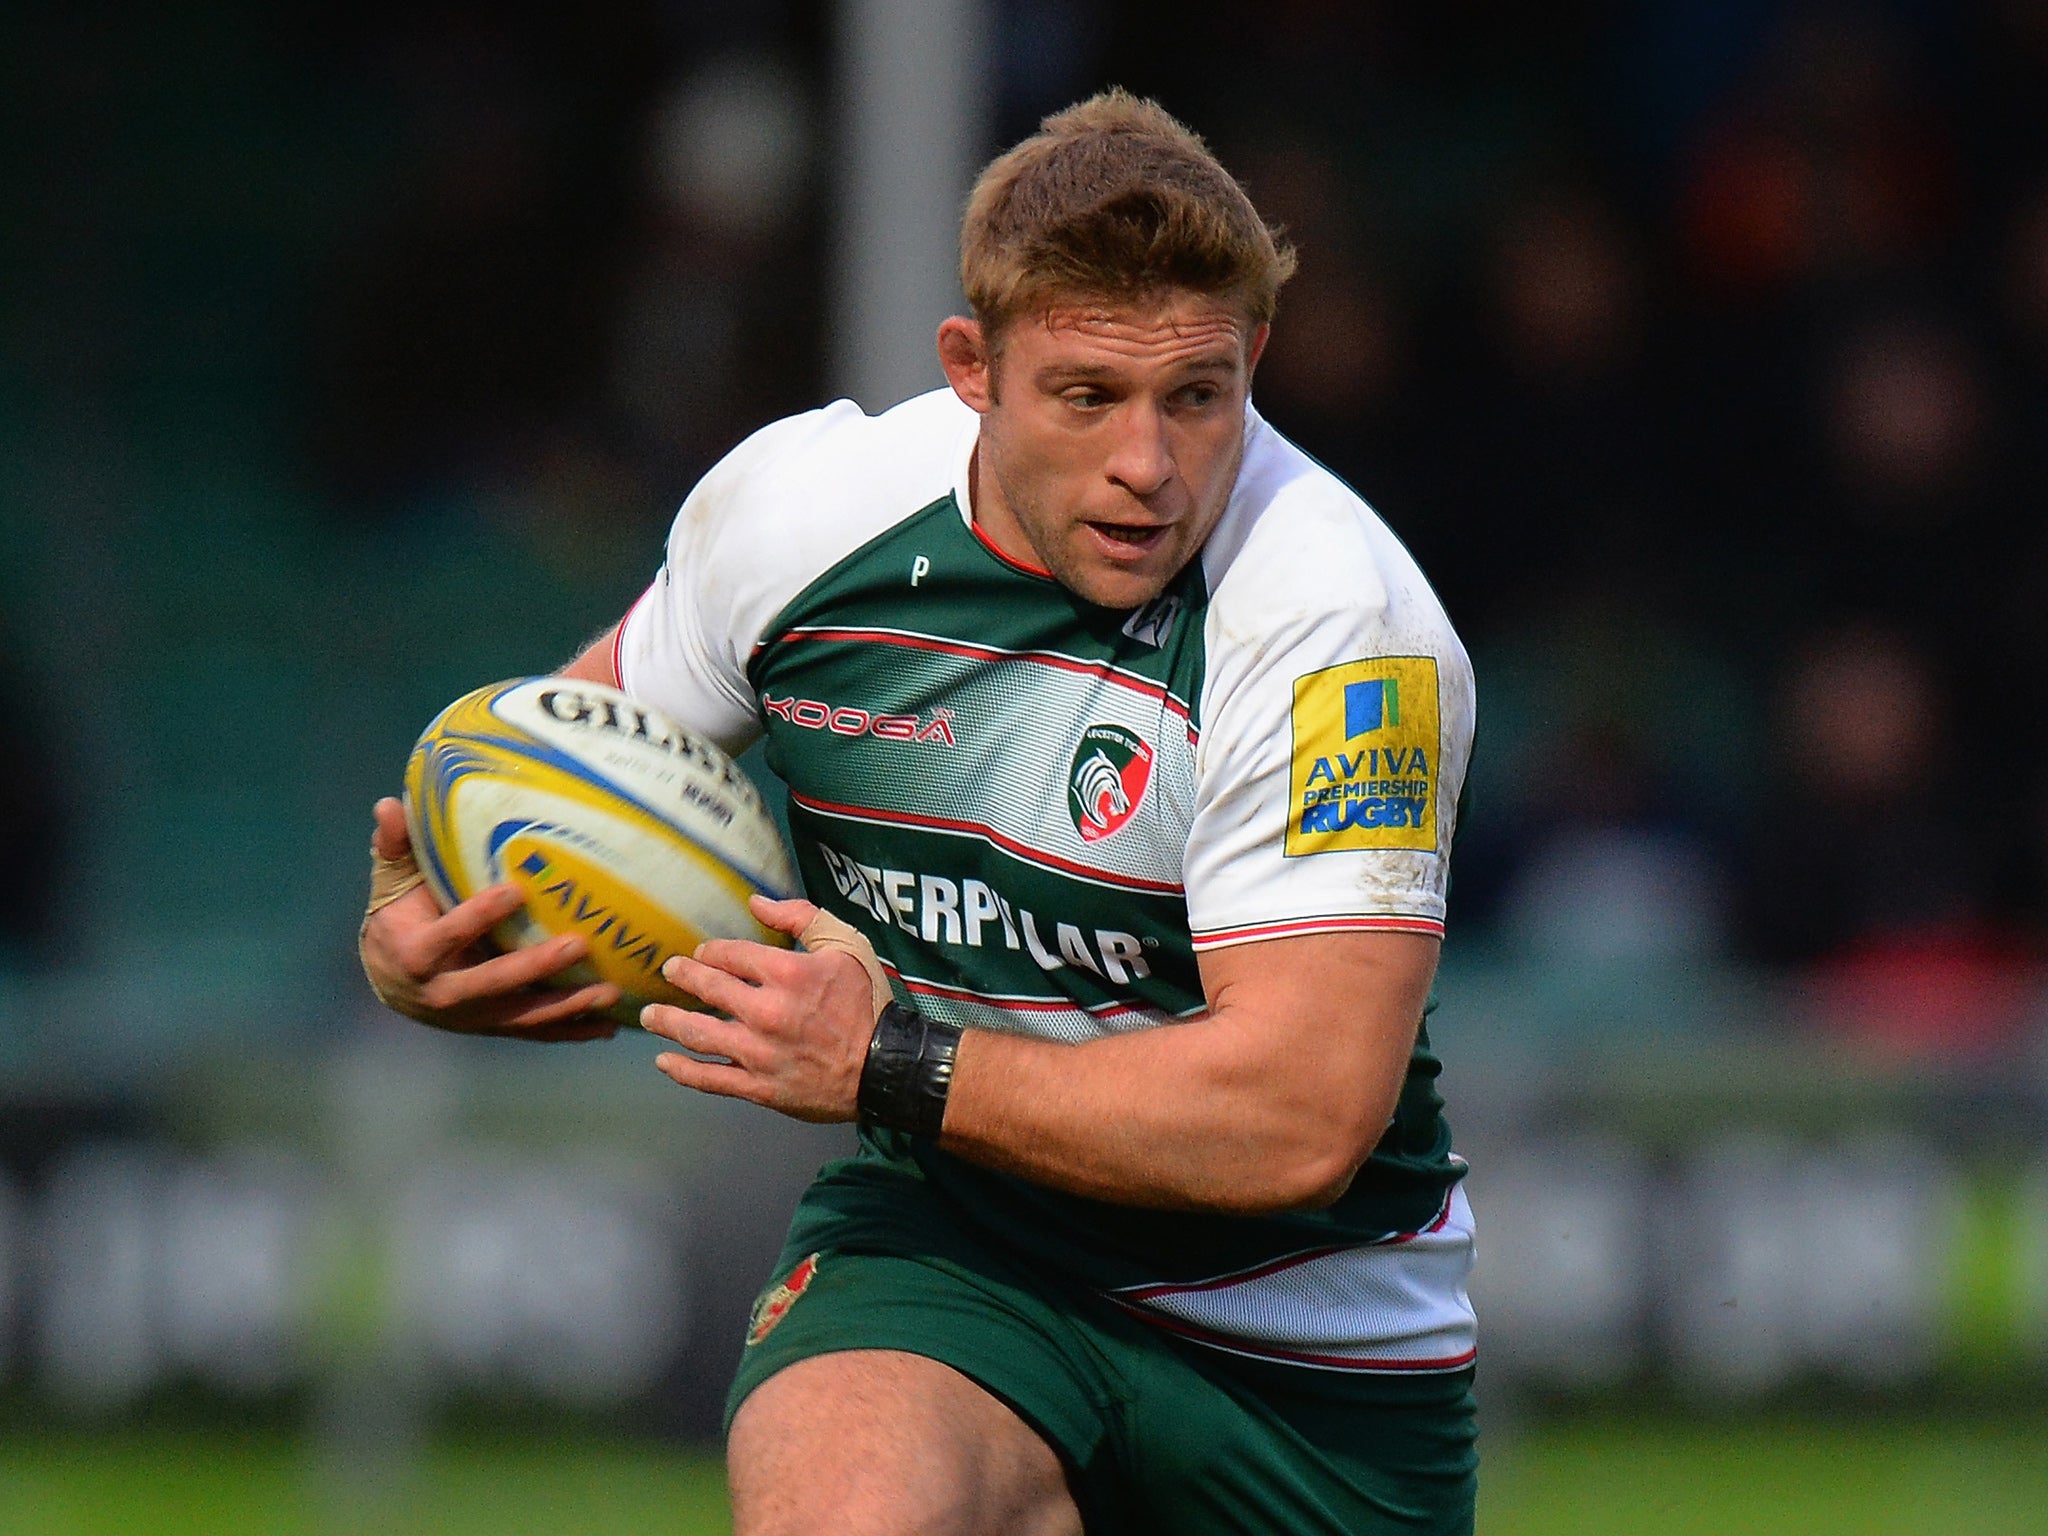 England coach Eddie Jones chose to leave out hooker Tom Youngs